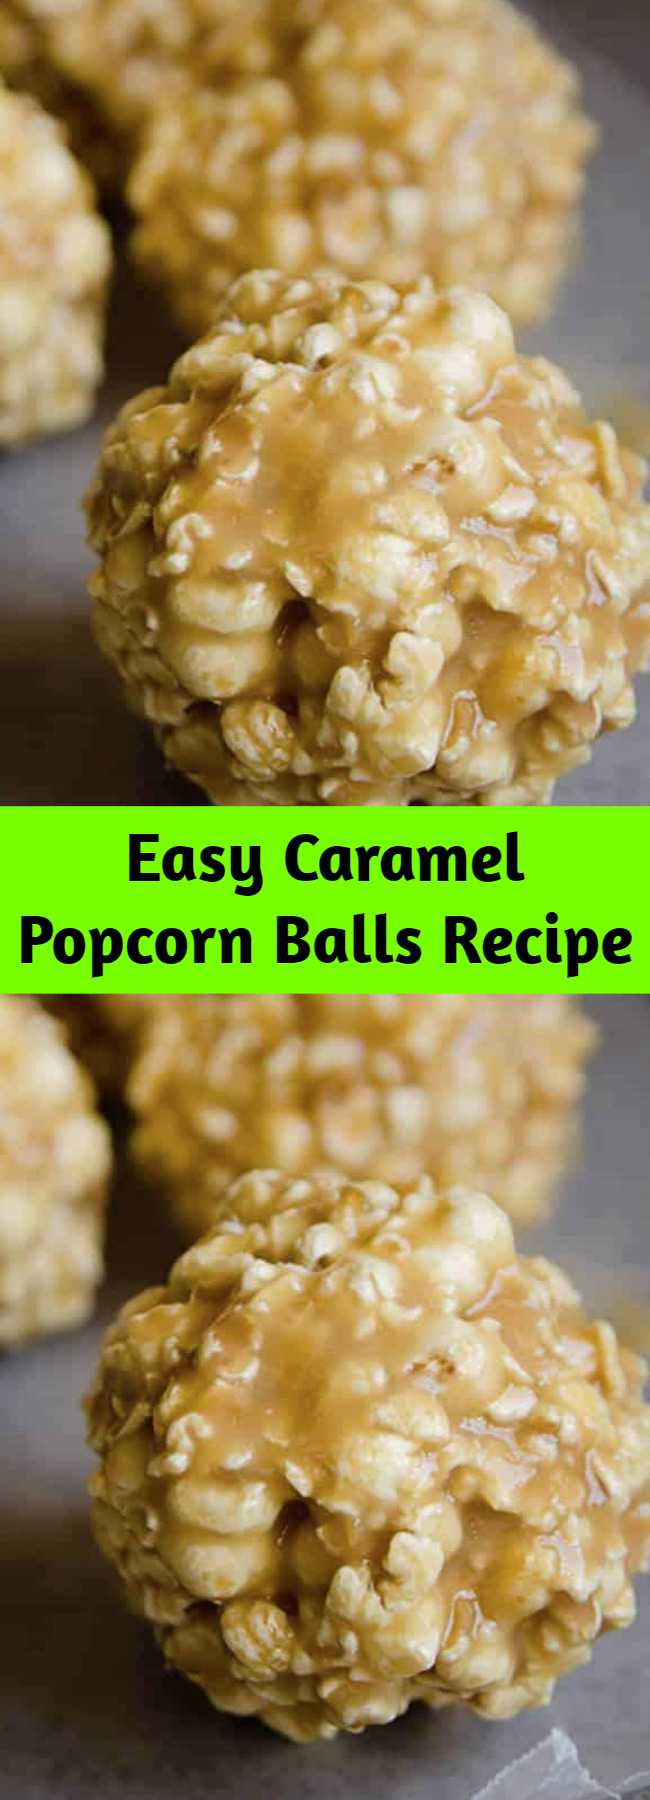 Easy Caramel Popcorn Balls Recipe - This ooey gooey caramel popcorn recipe is seriously the best! great flavor and easy to make. Perfect for party favors, friends and family. #partytreats #holidaygifts #caramelcorn #popcornballs